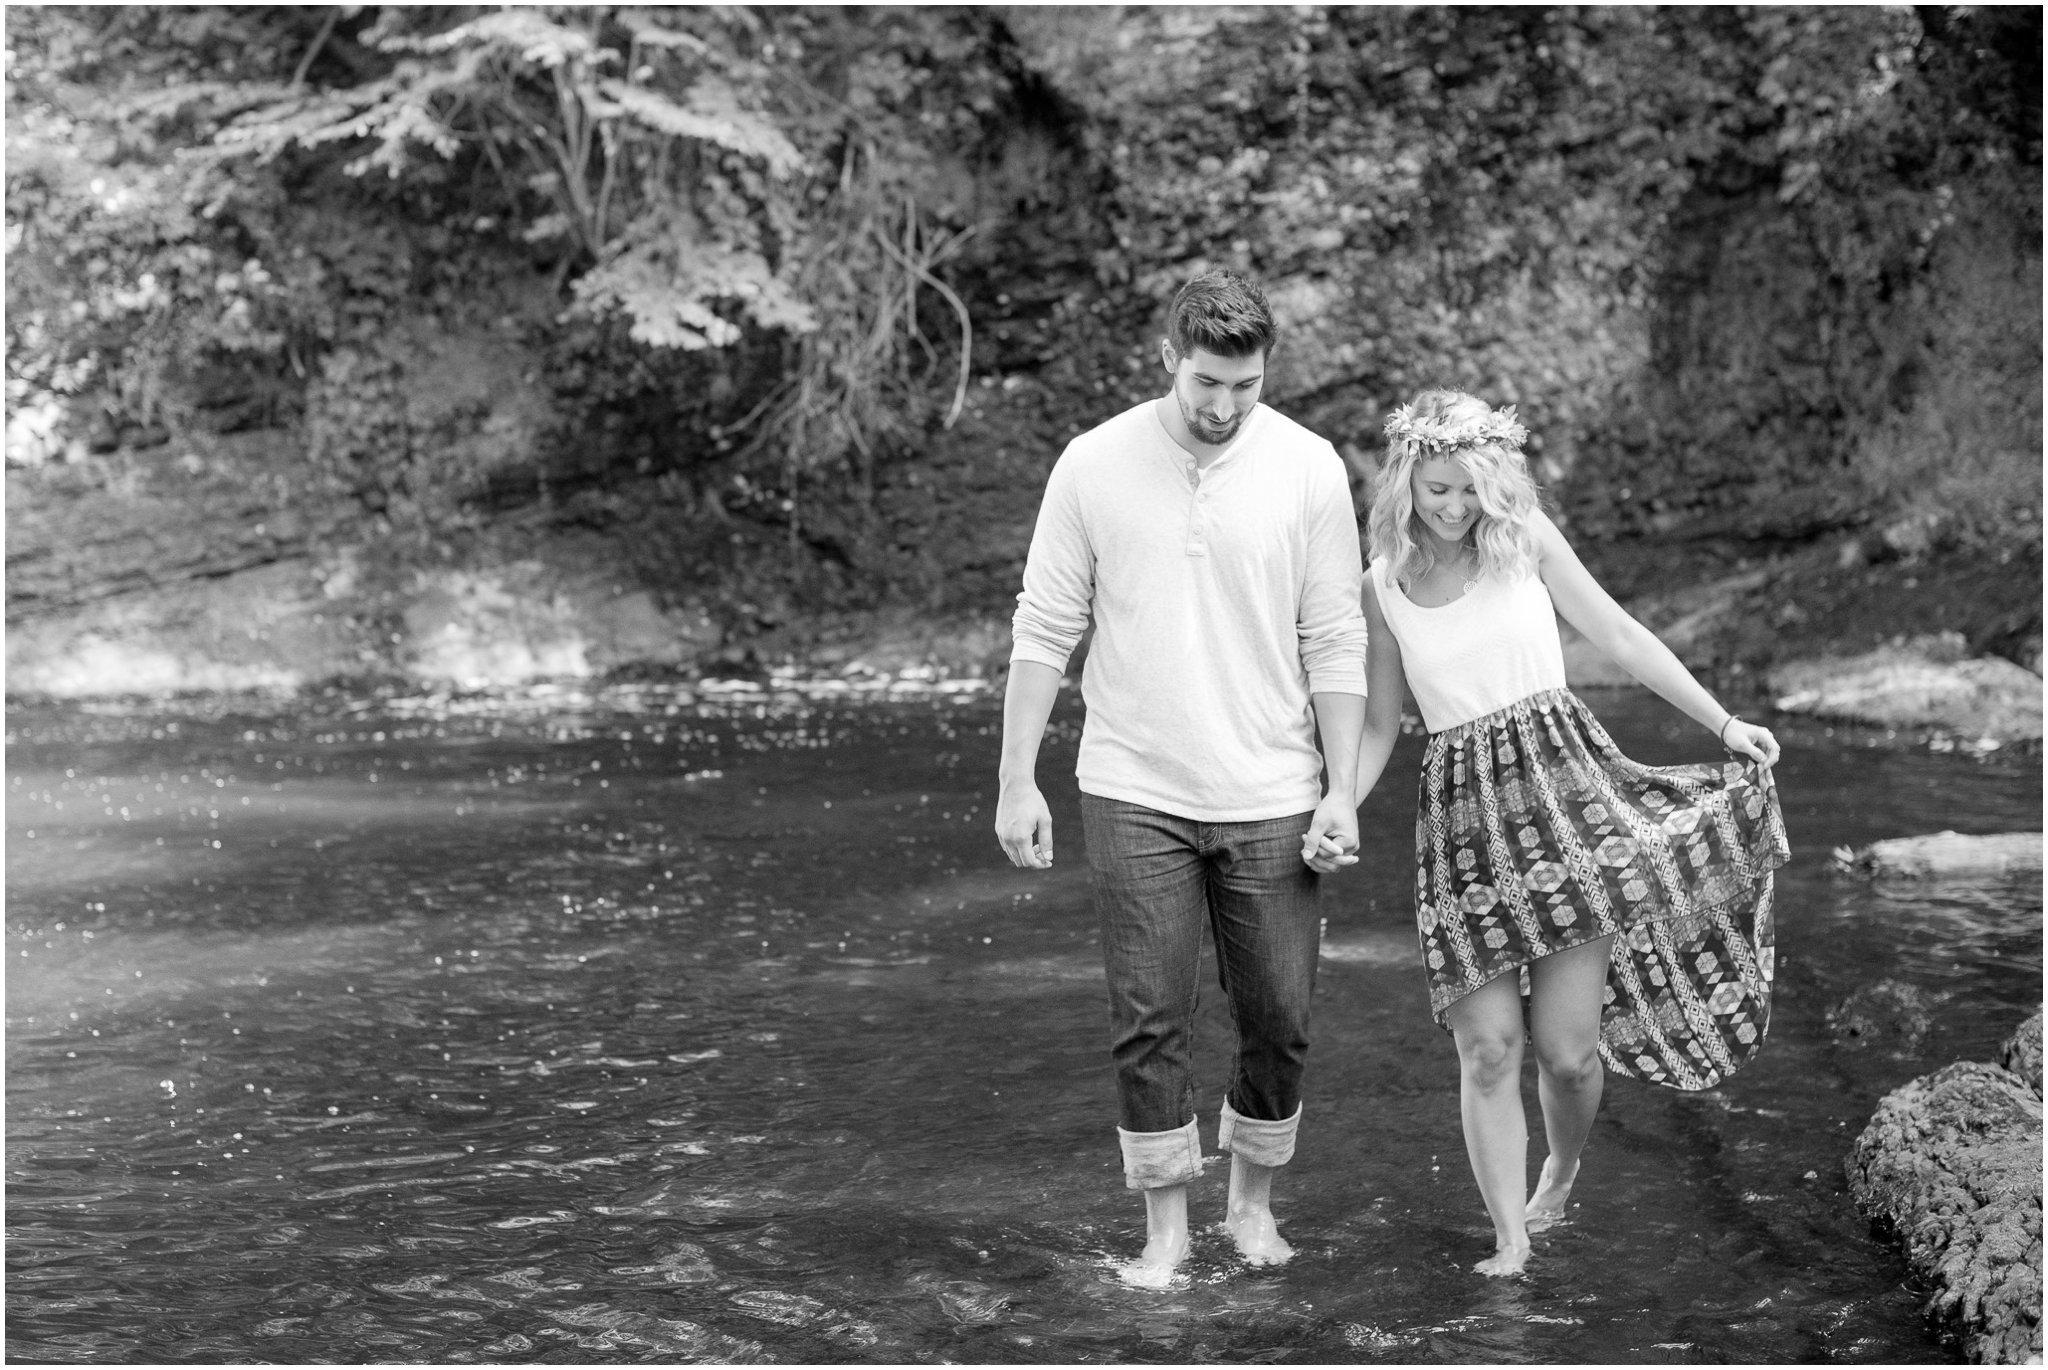 Waterfall Engagement Session - Laura Lee Photography